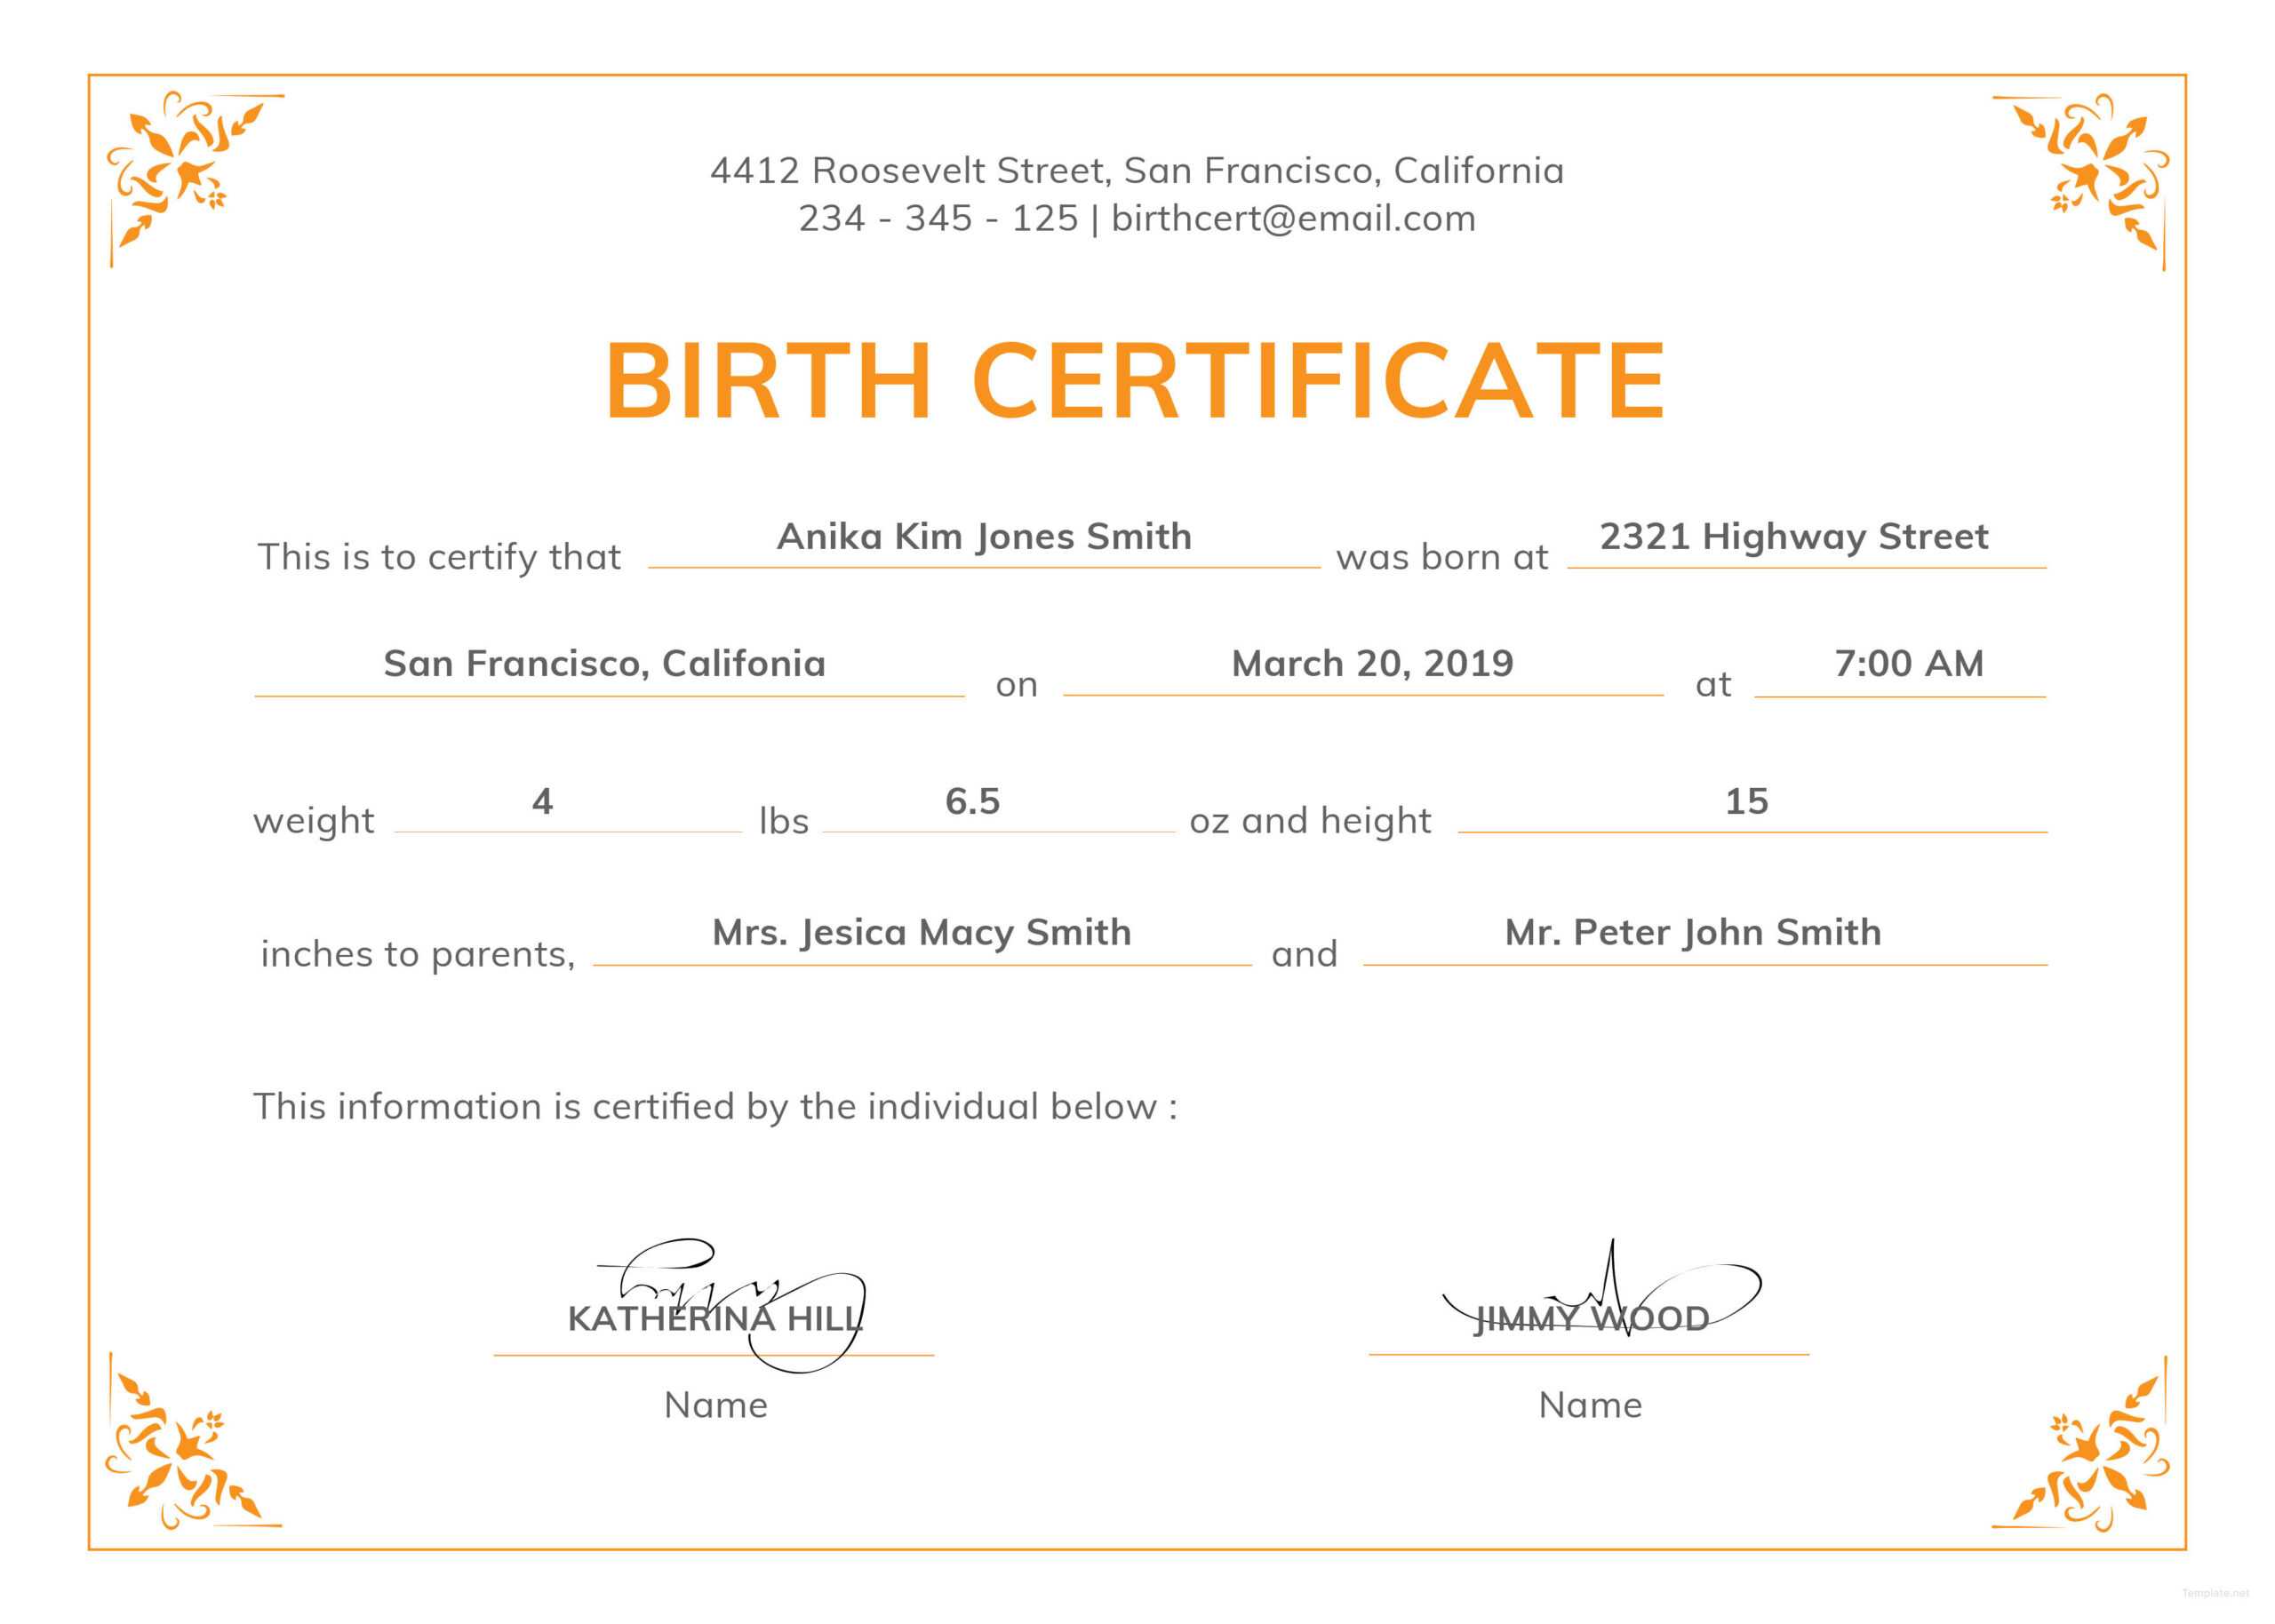 Can Make A Delivery Certificate Crucial | Gift Certificate With Birth Certificate Template Uk